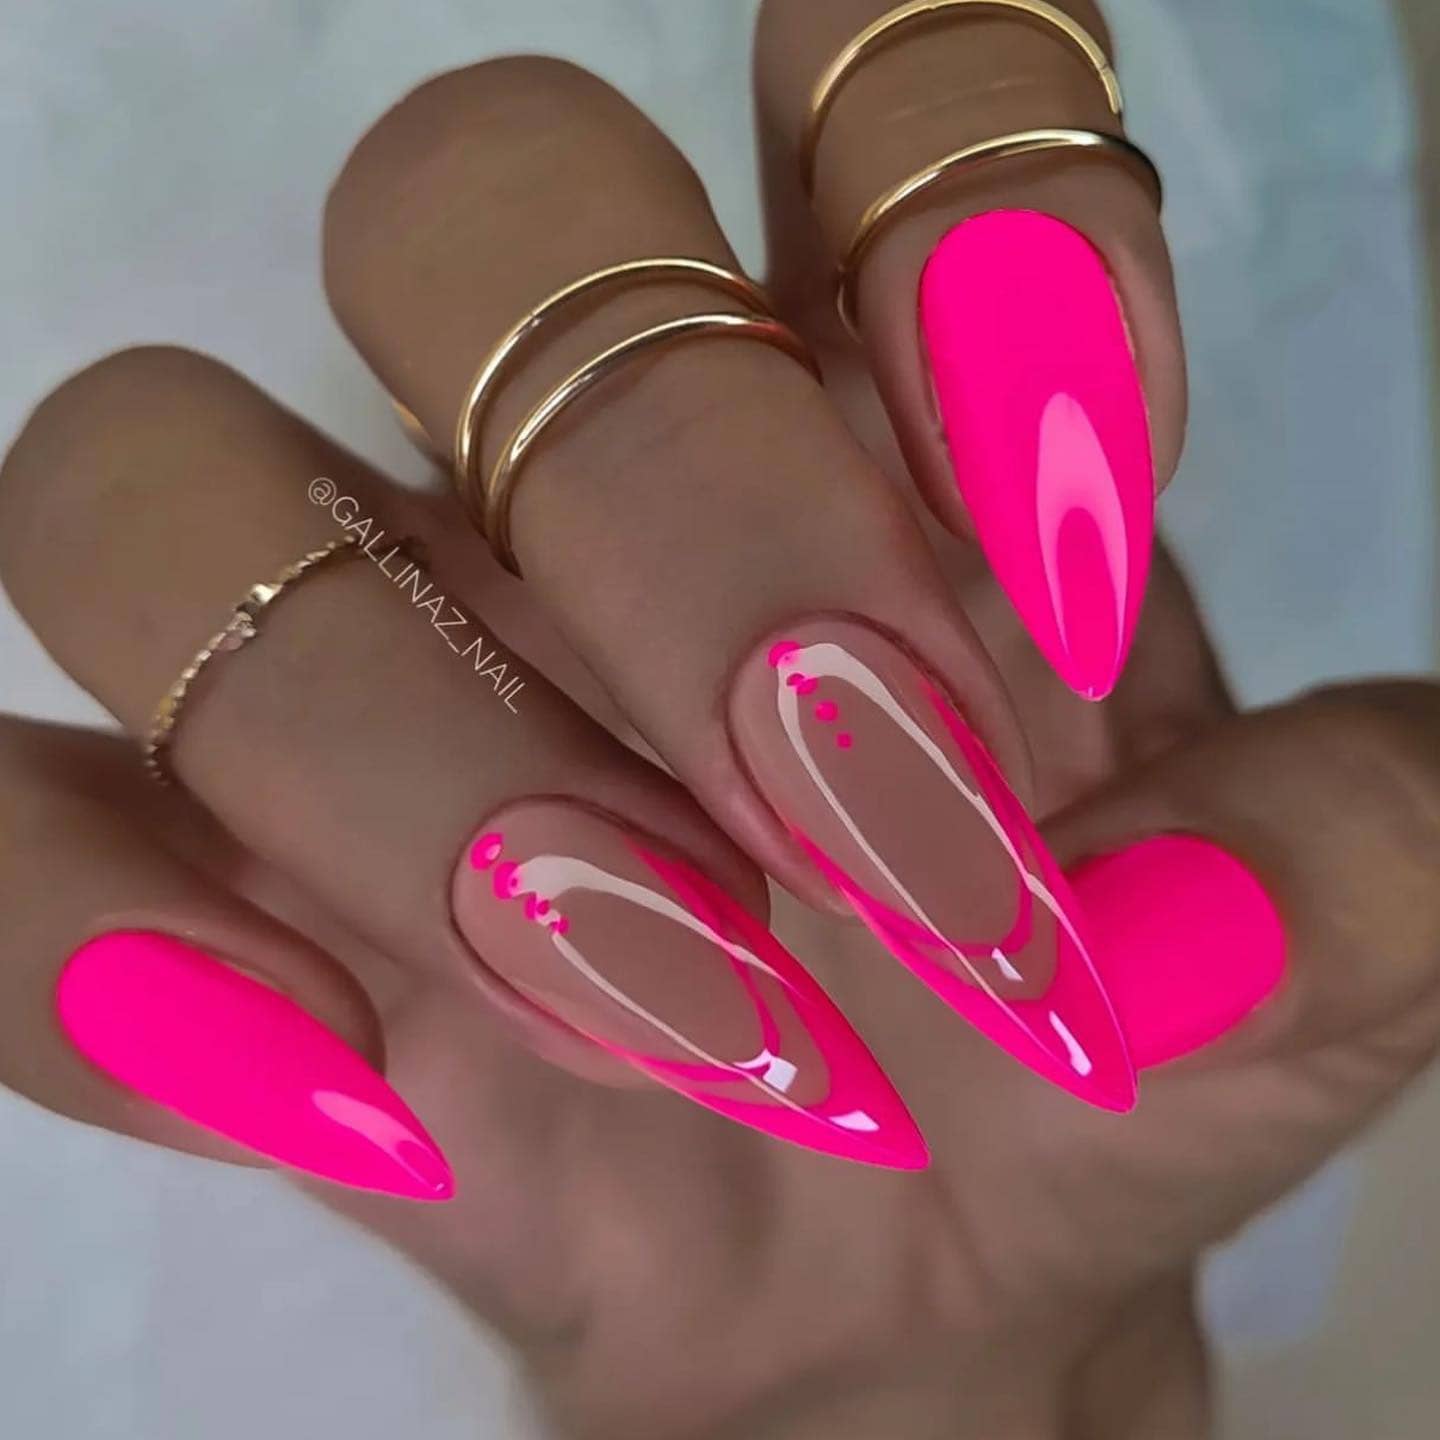 Over 100 Bright Summer Nail Art Designs That Will Be So Trendy images 100